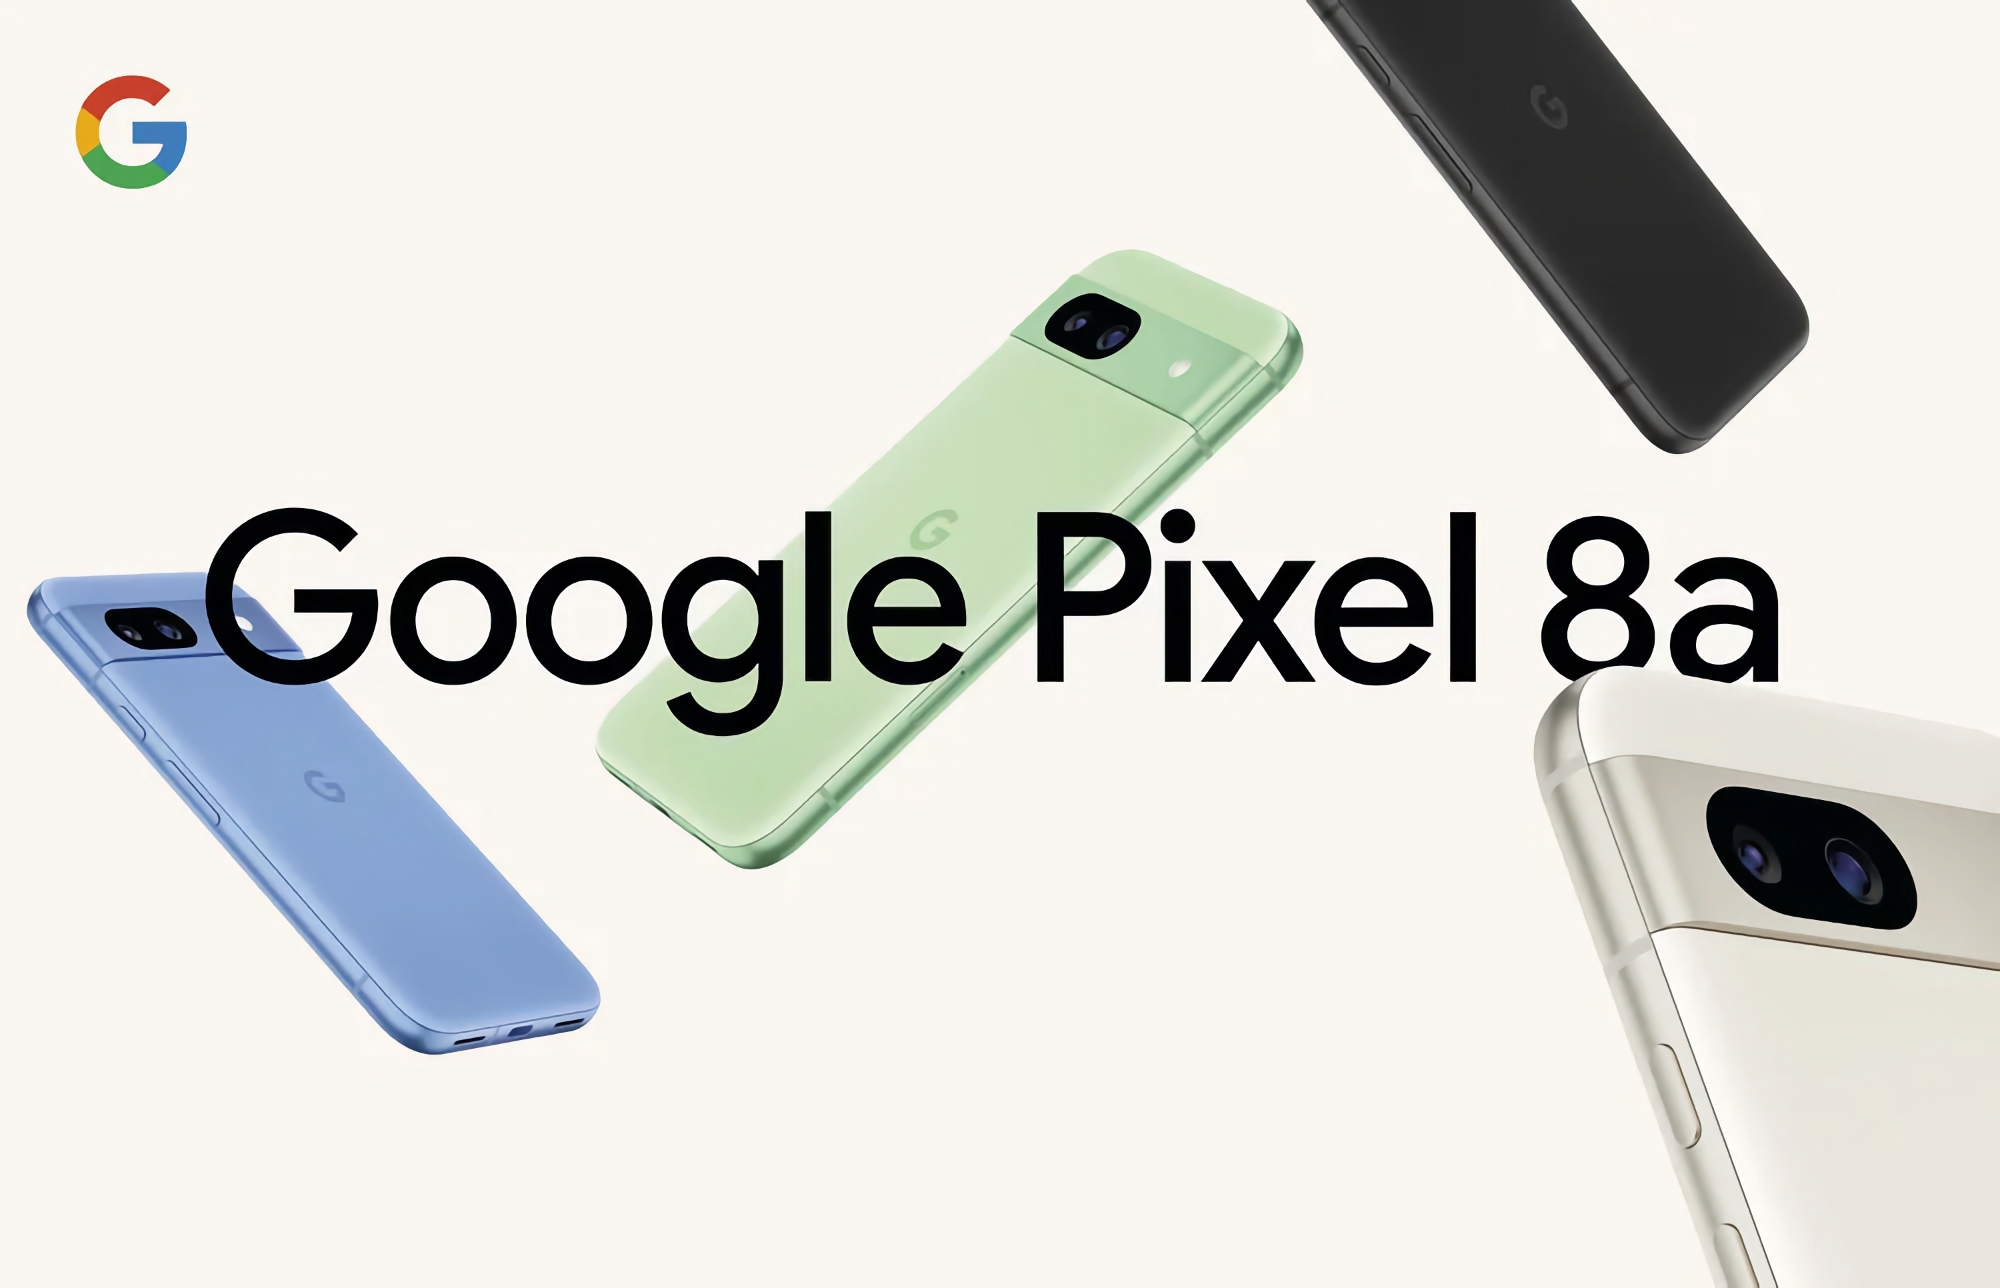 Google Pixel 8a with 120Hz AMOLED screen, Tensor G3 chip and IP67 protection is already available to buy on Amazon